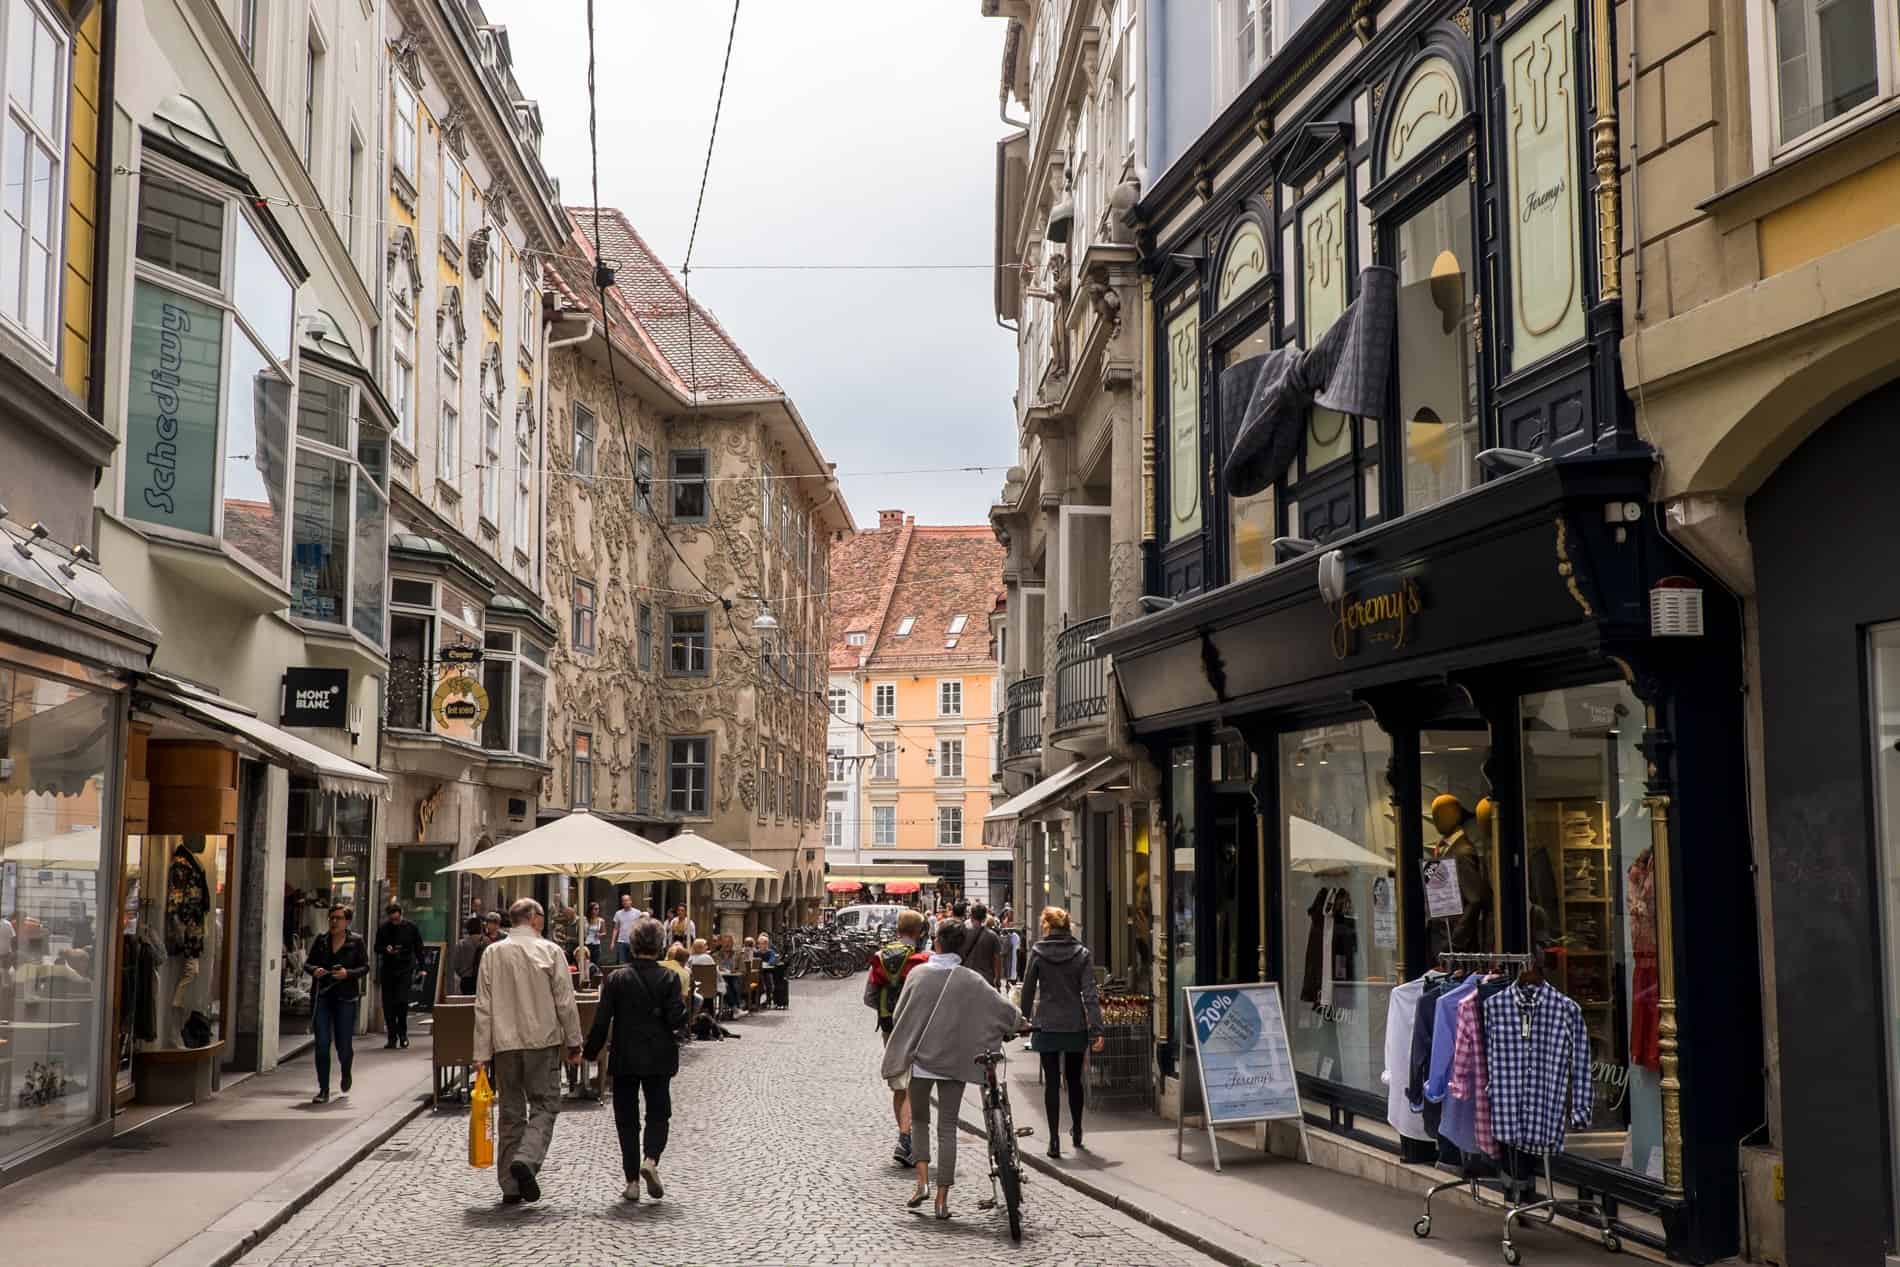 People walking down the beautiful, old Sporgasse street in Graz lined with decorated facades and exquisite shopfronts. 